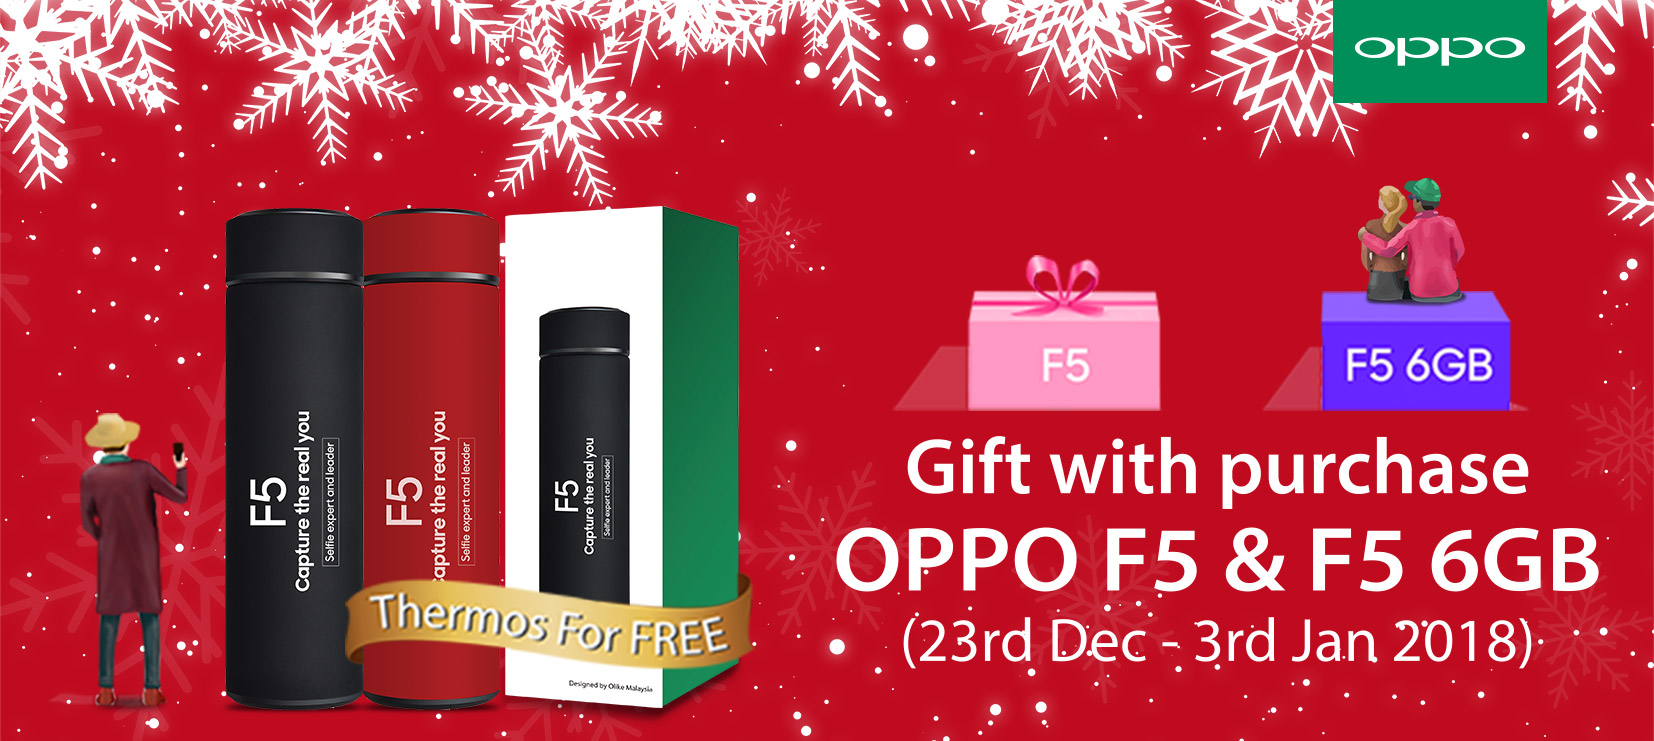 OPPO F5 & F5 6GB to get a free Thermo.jpg